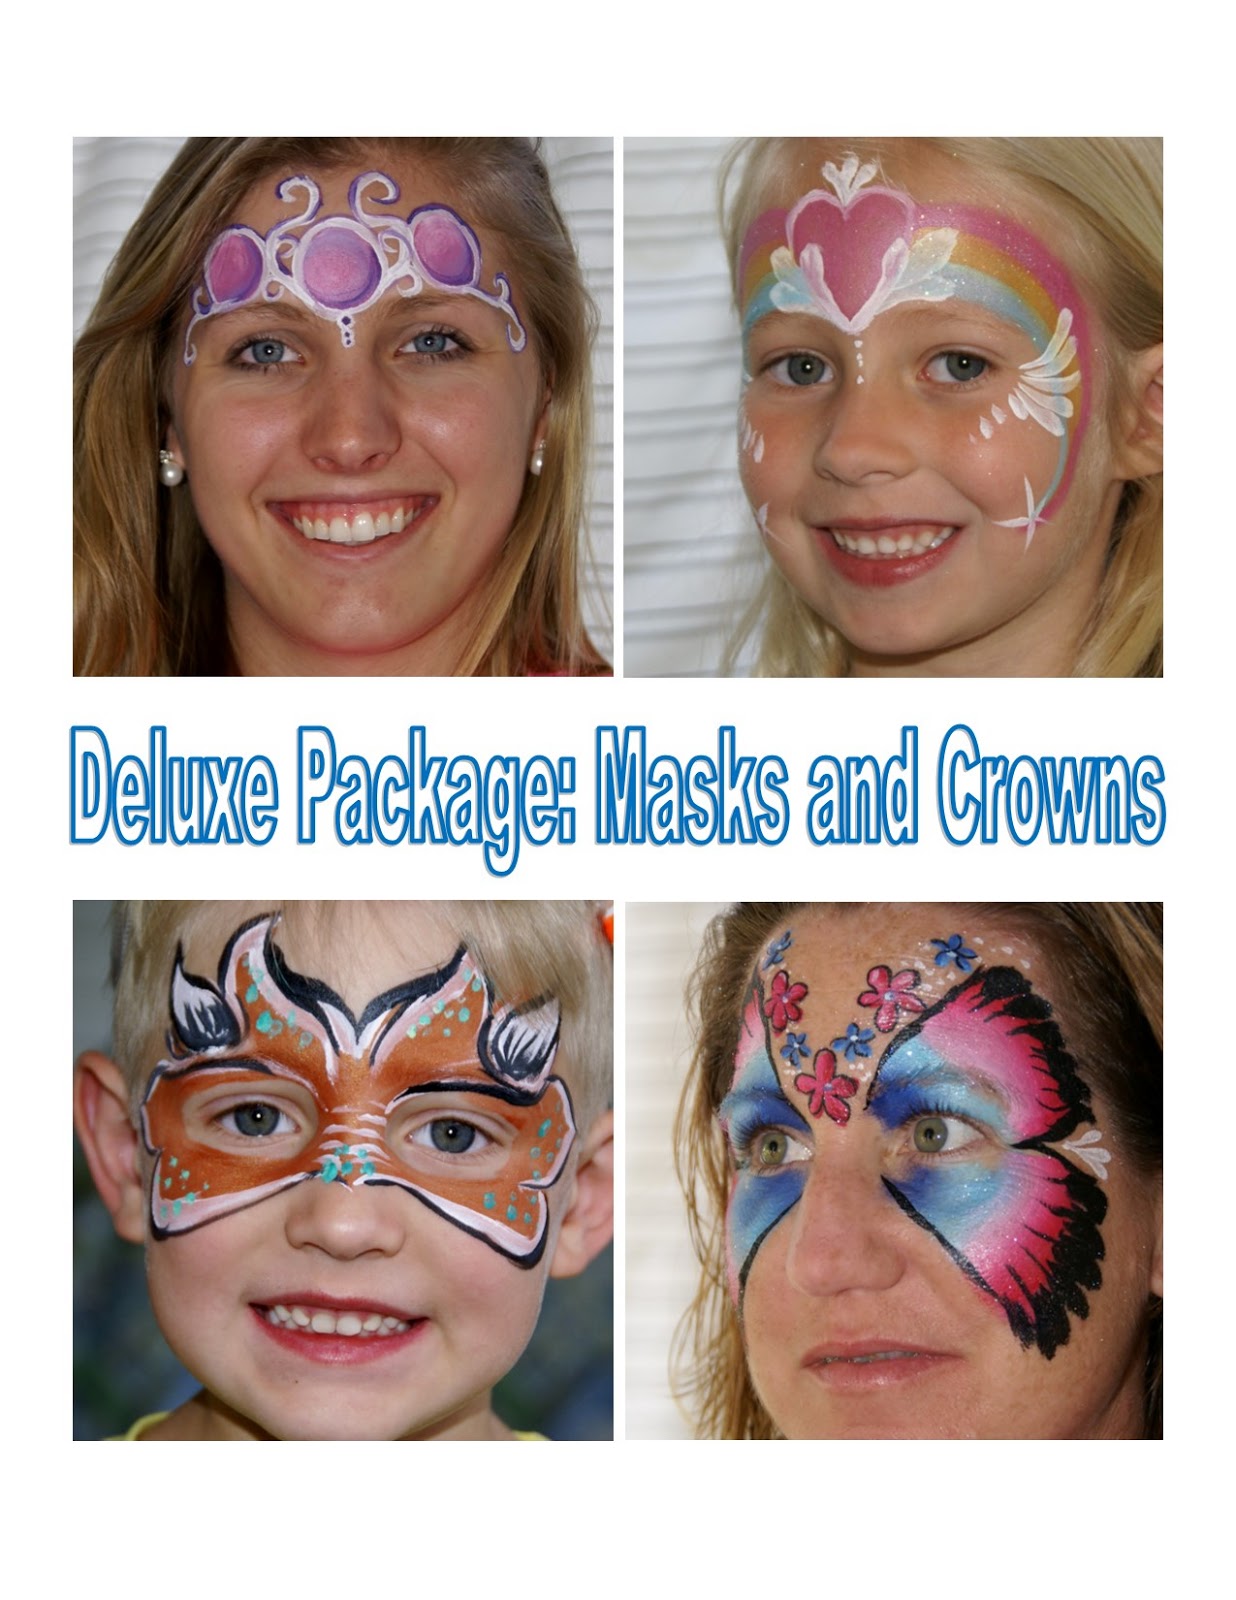 Paintings By Beth: New Face Painting Designs